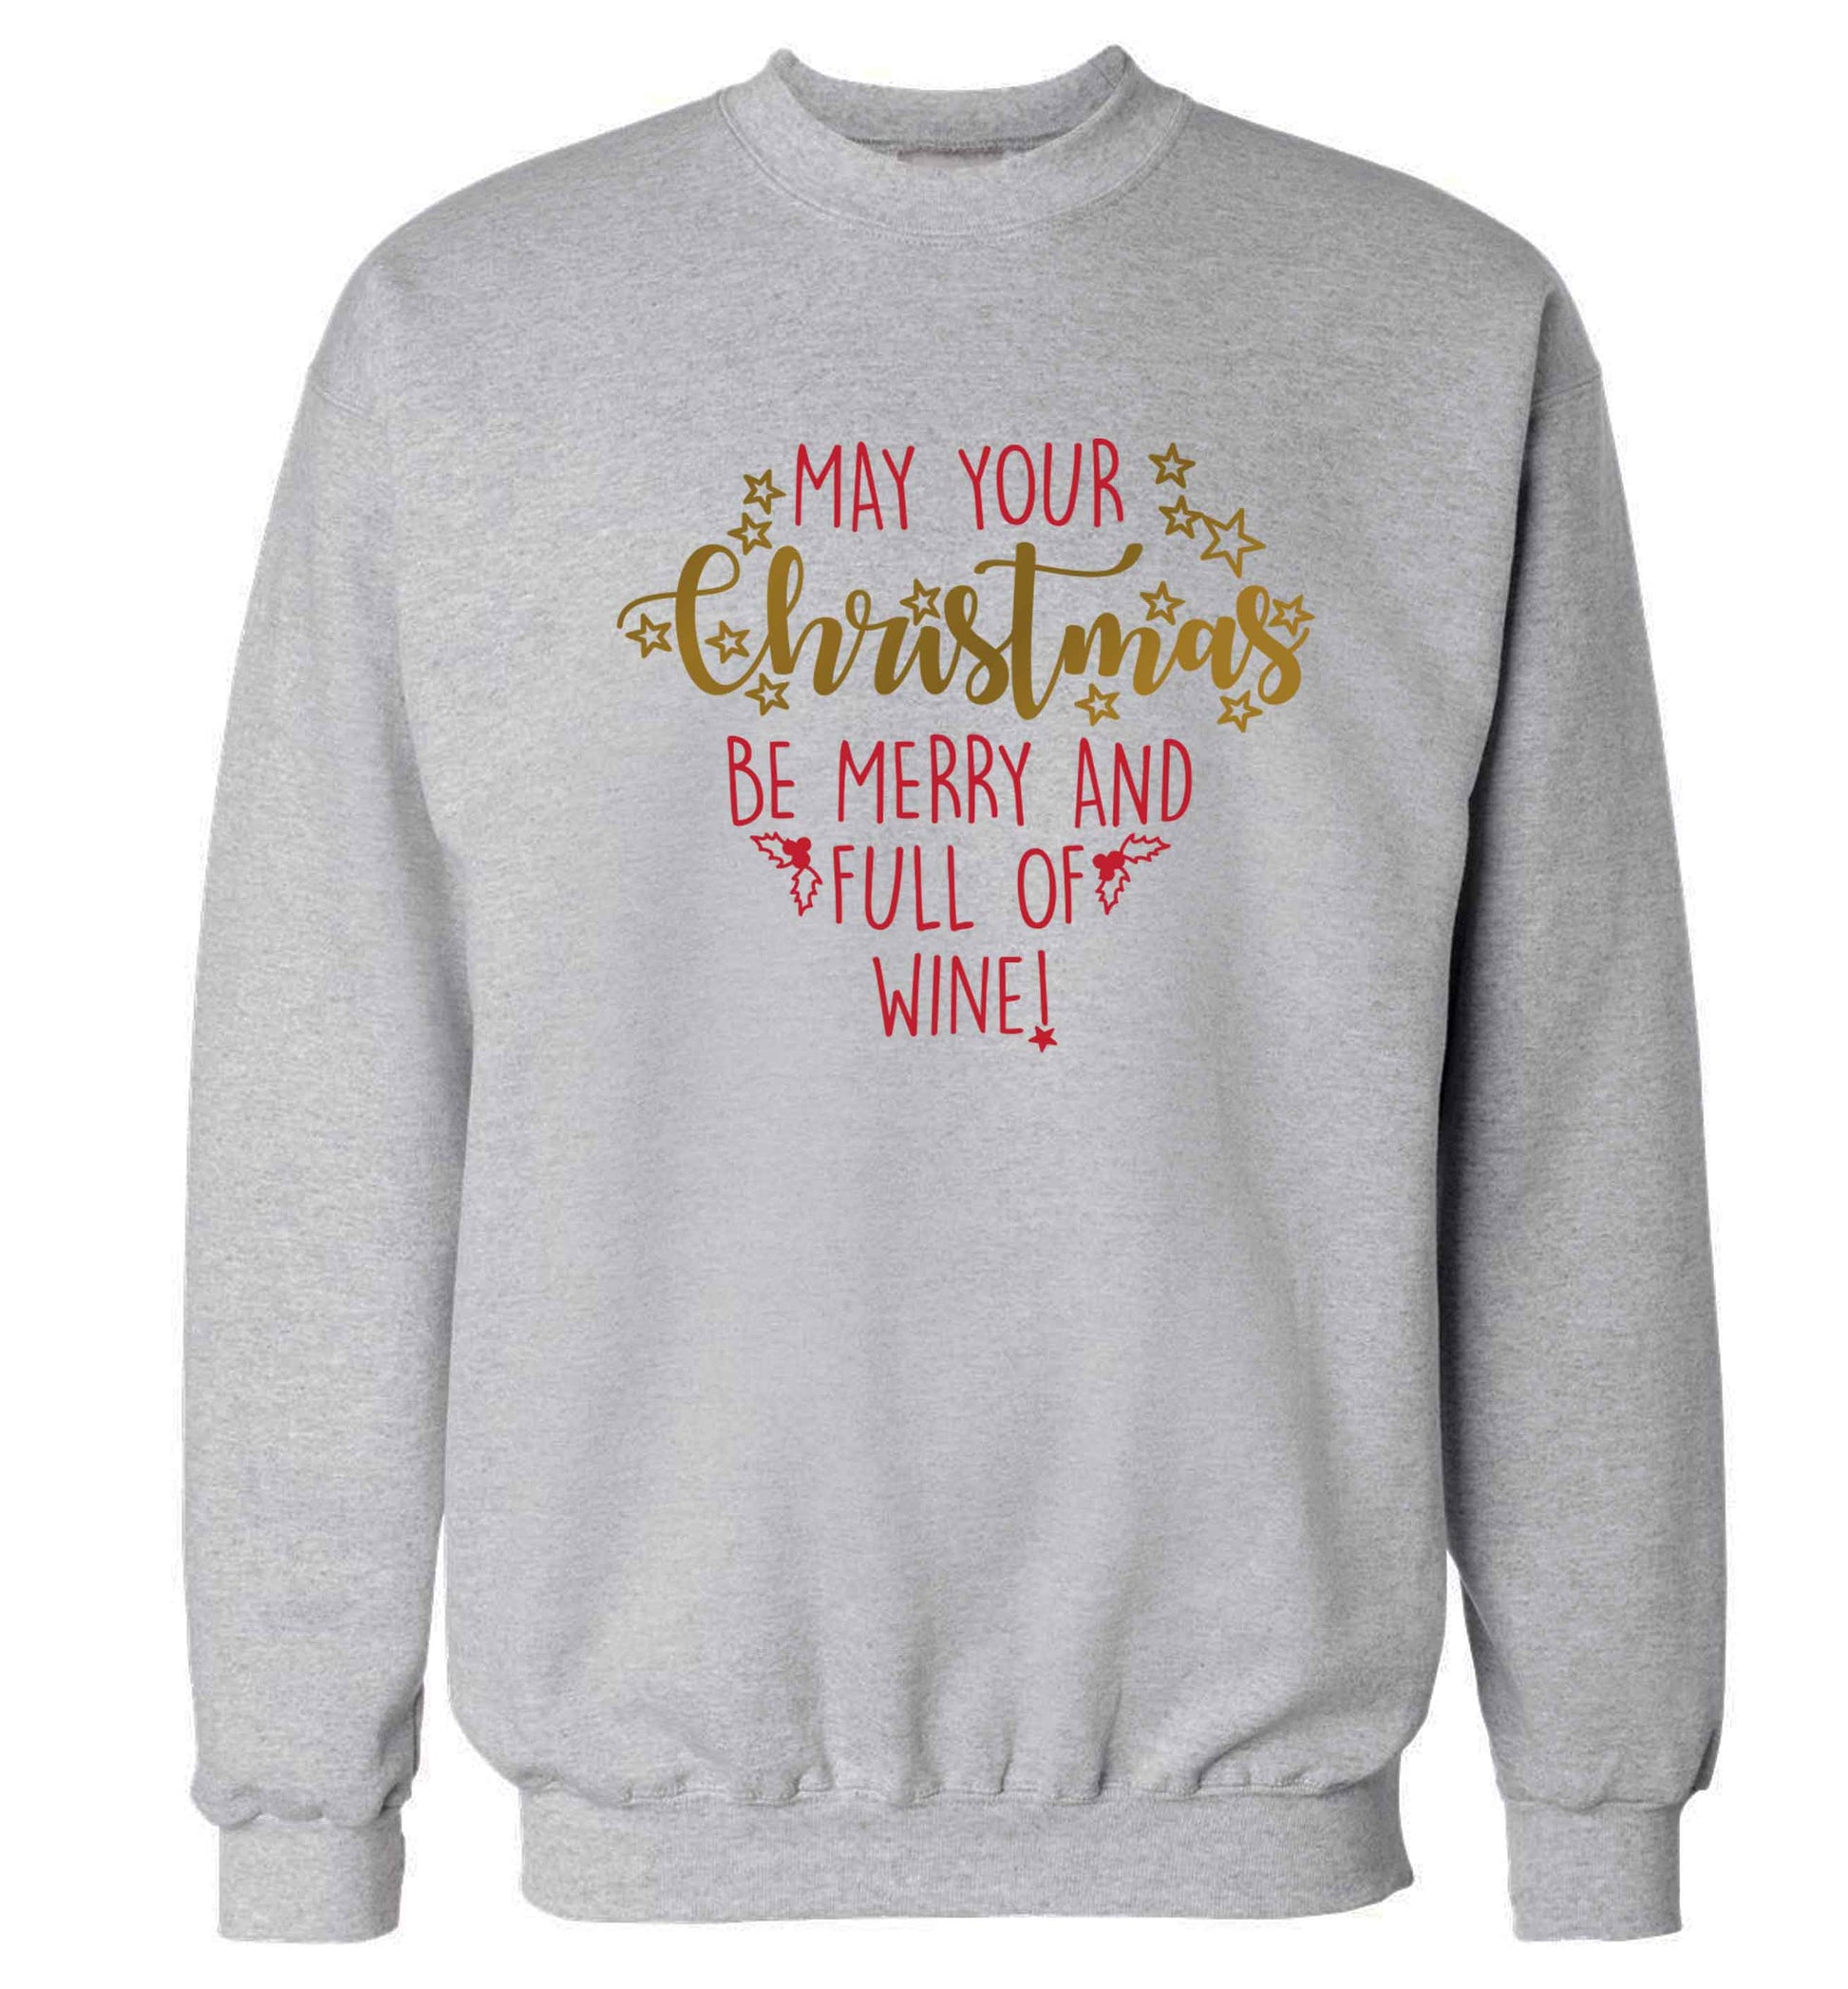 May your Christmas be merry and full of wine Adult's unisex grey Sweater 2XL